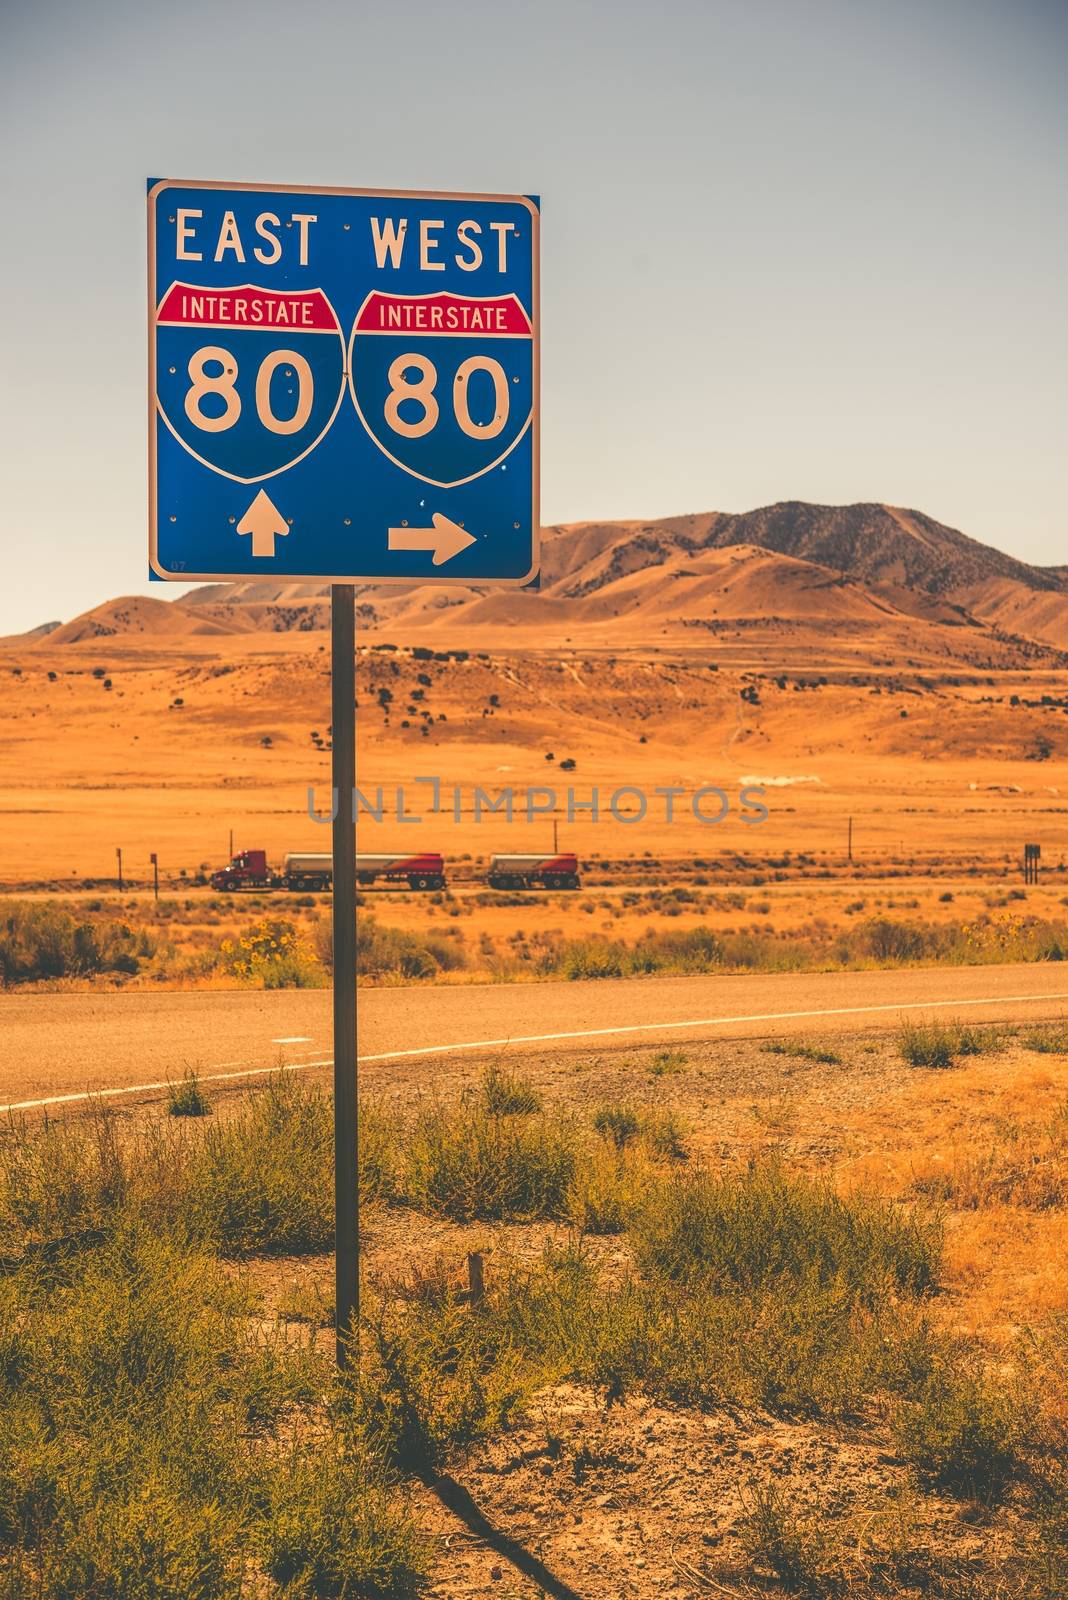 American Interstate I-80 by welcomia